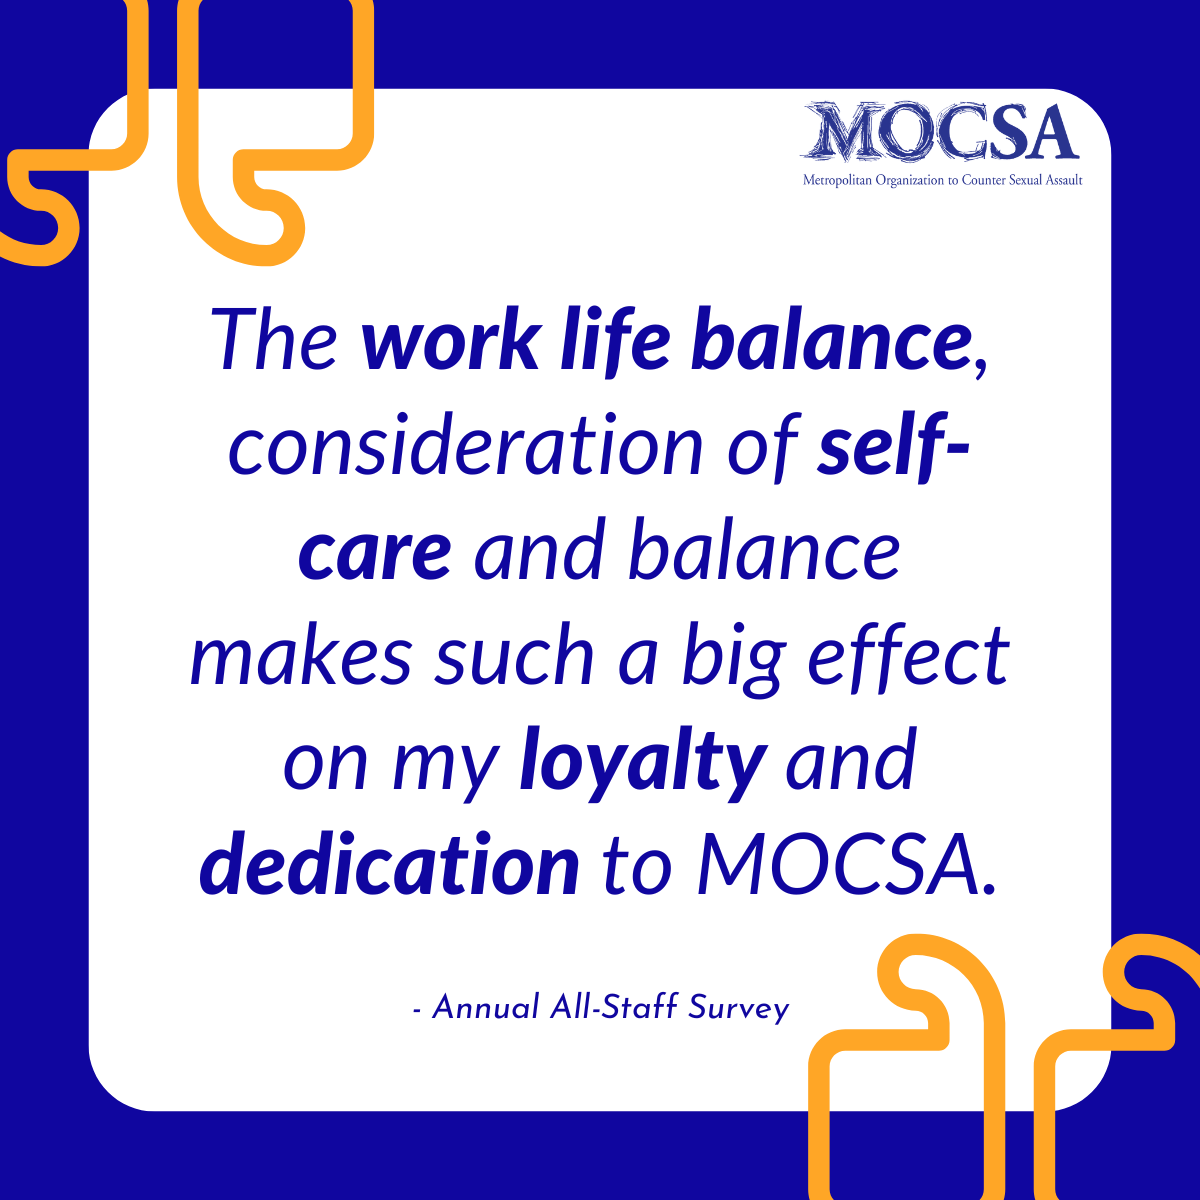 Blue text on white background that reads: The work life balance, consideration of self-care and balance makes such a big effect on my loyalty and dedication to MOCSA.